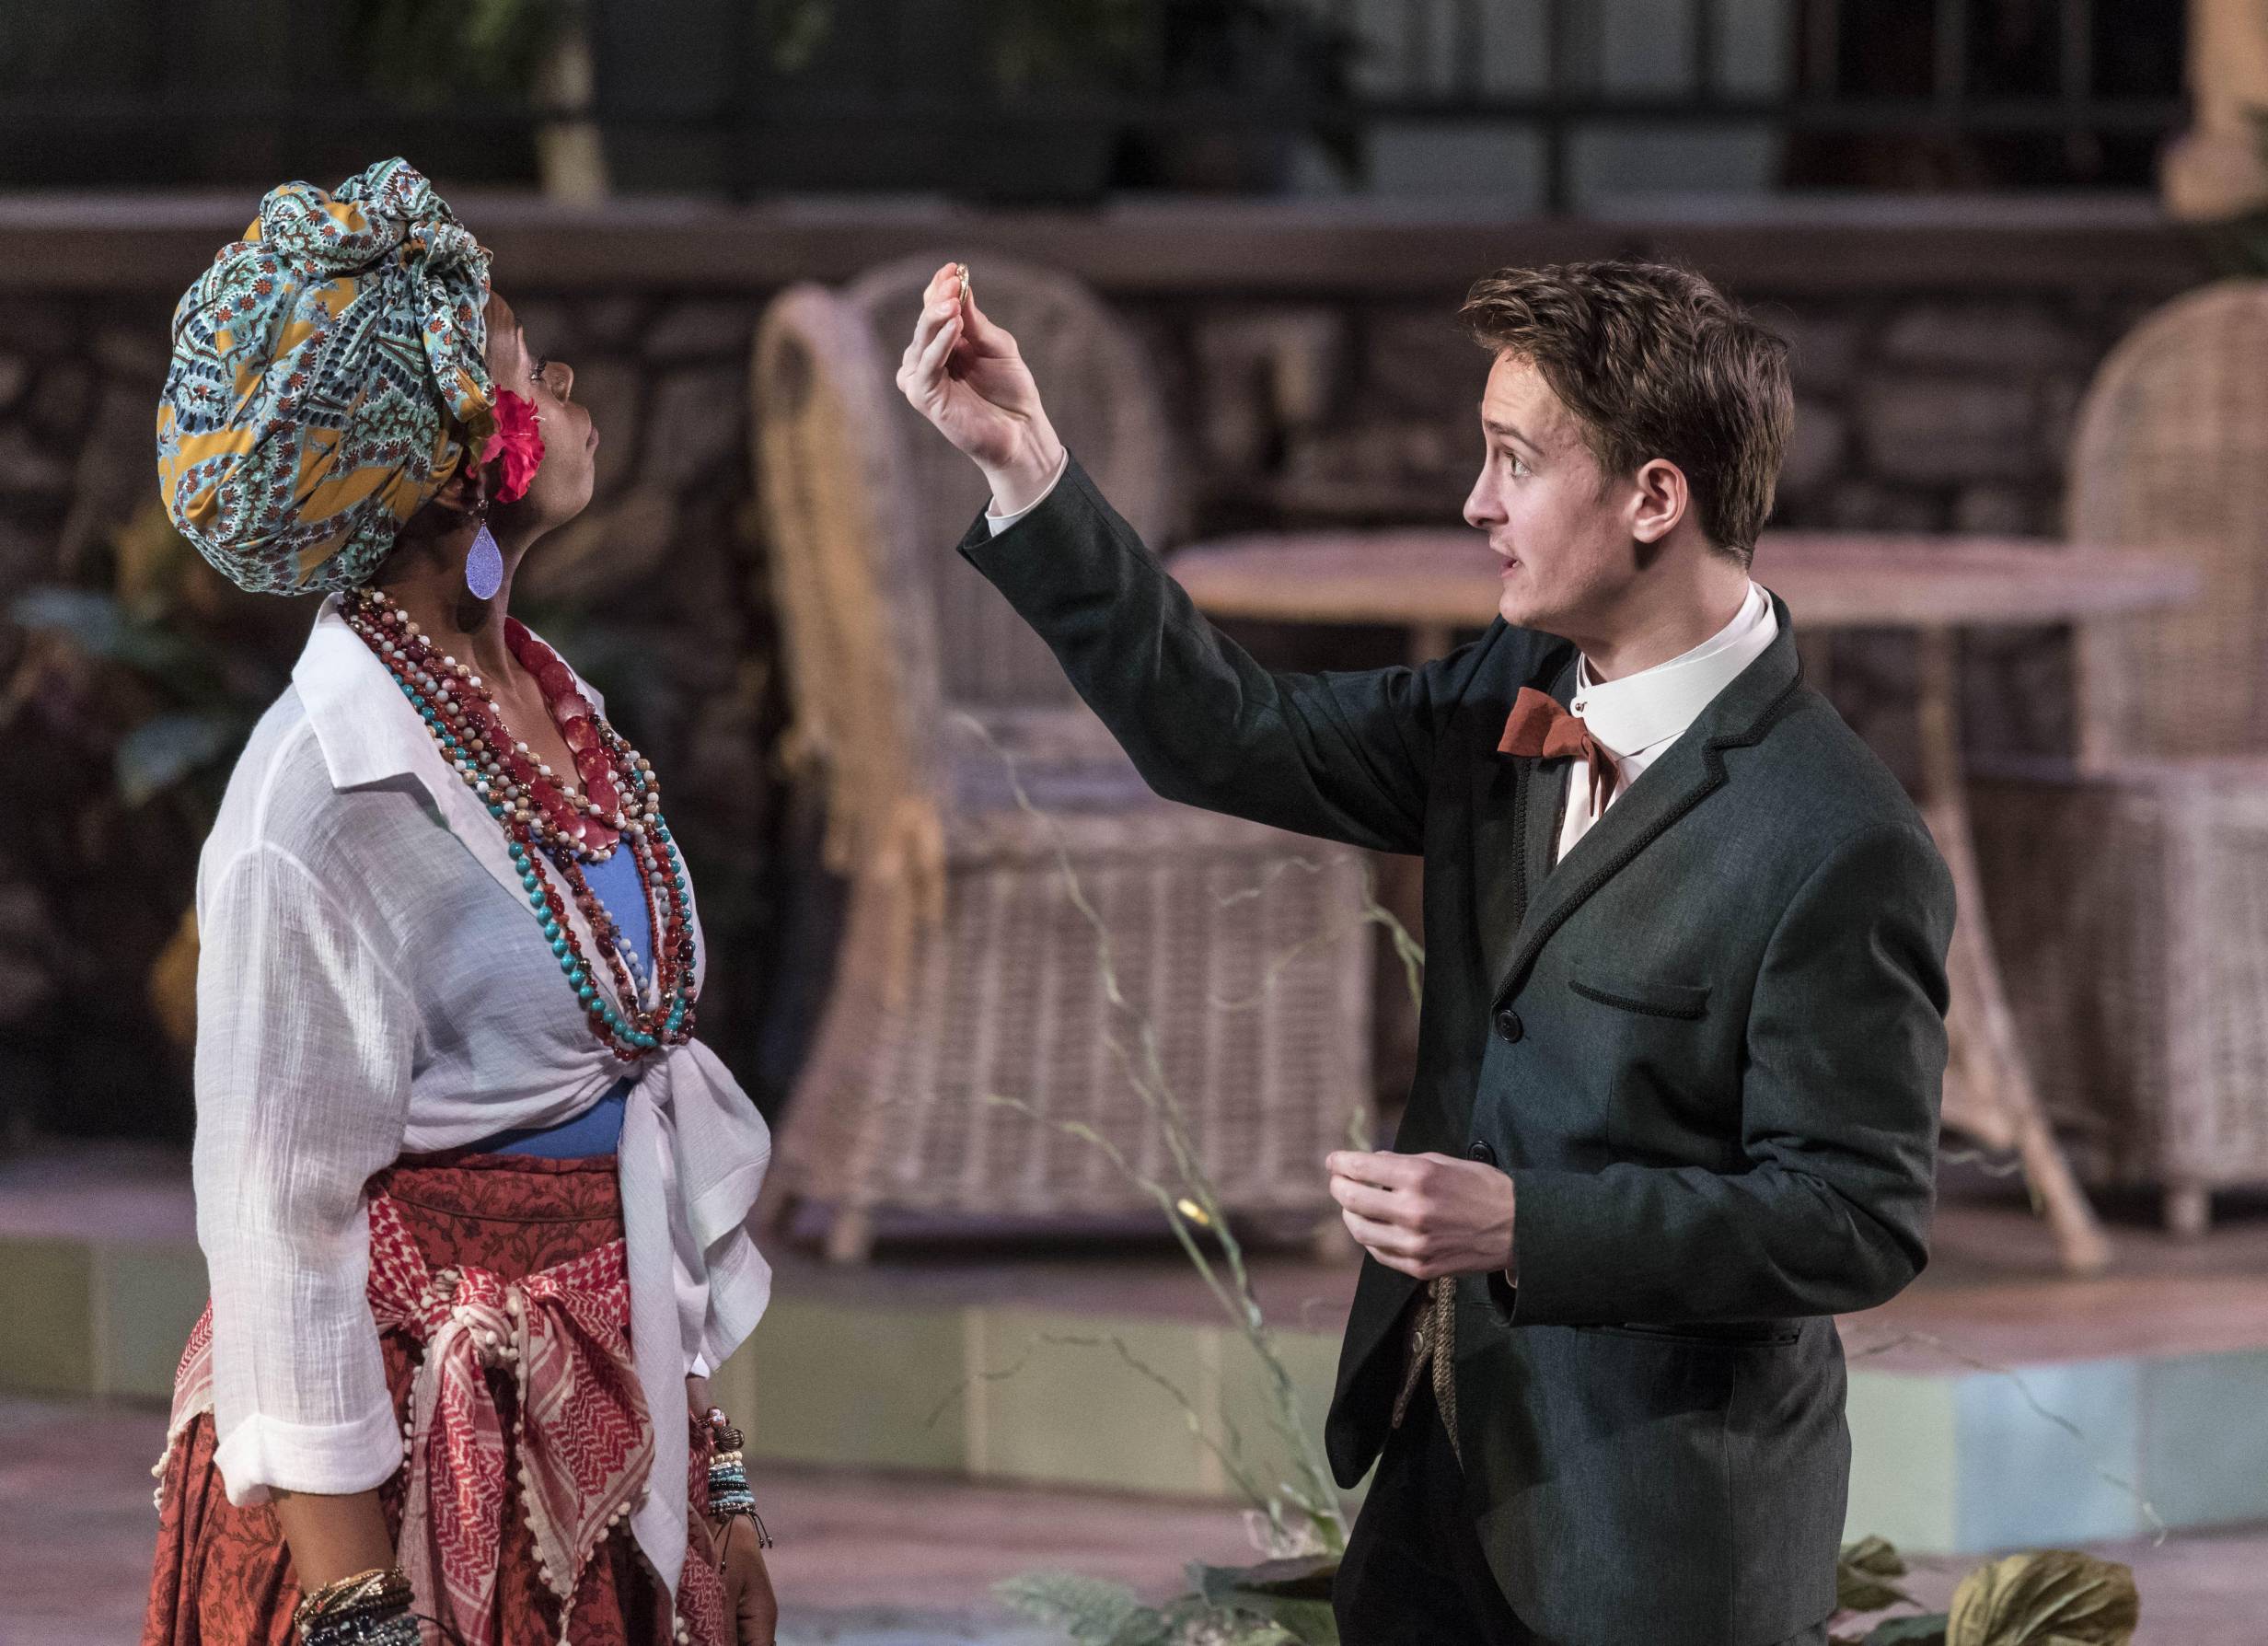 Illinois Theatre’s Twelfth Night, or what you need to see